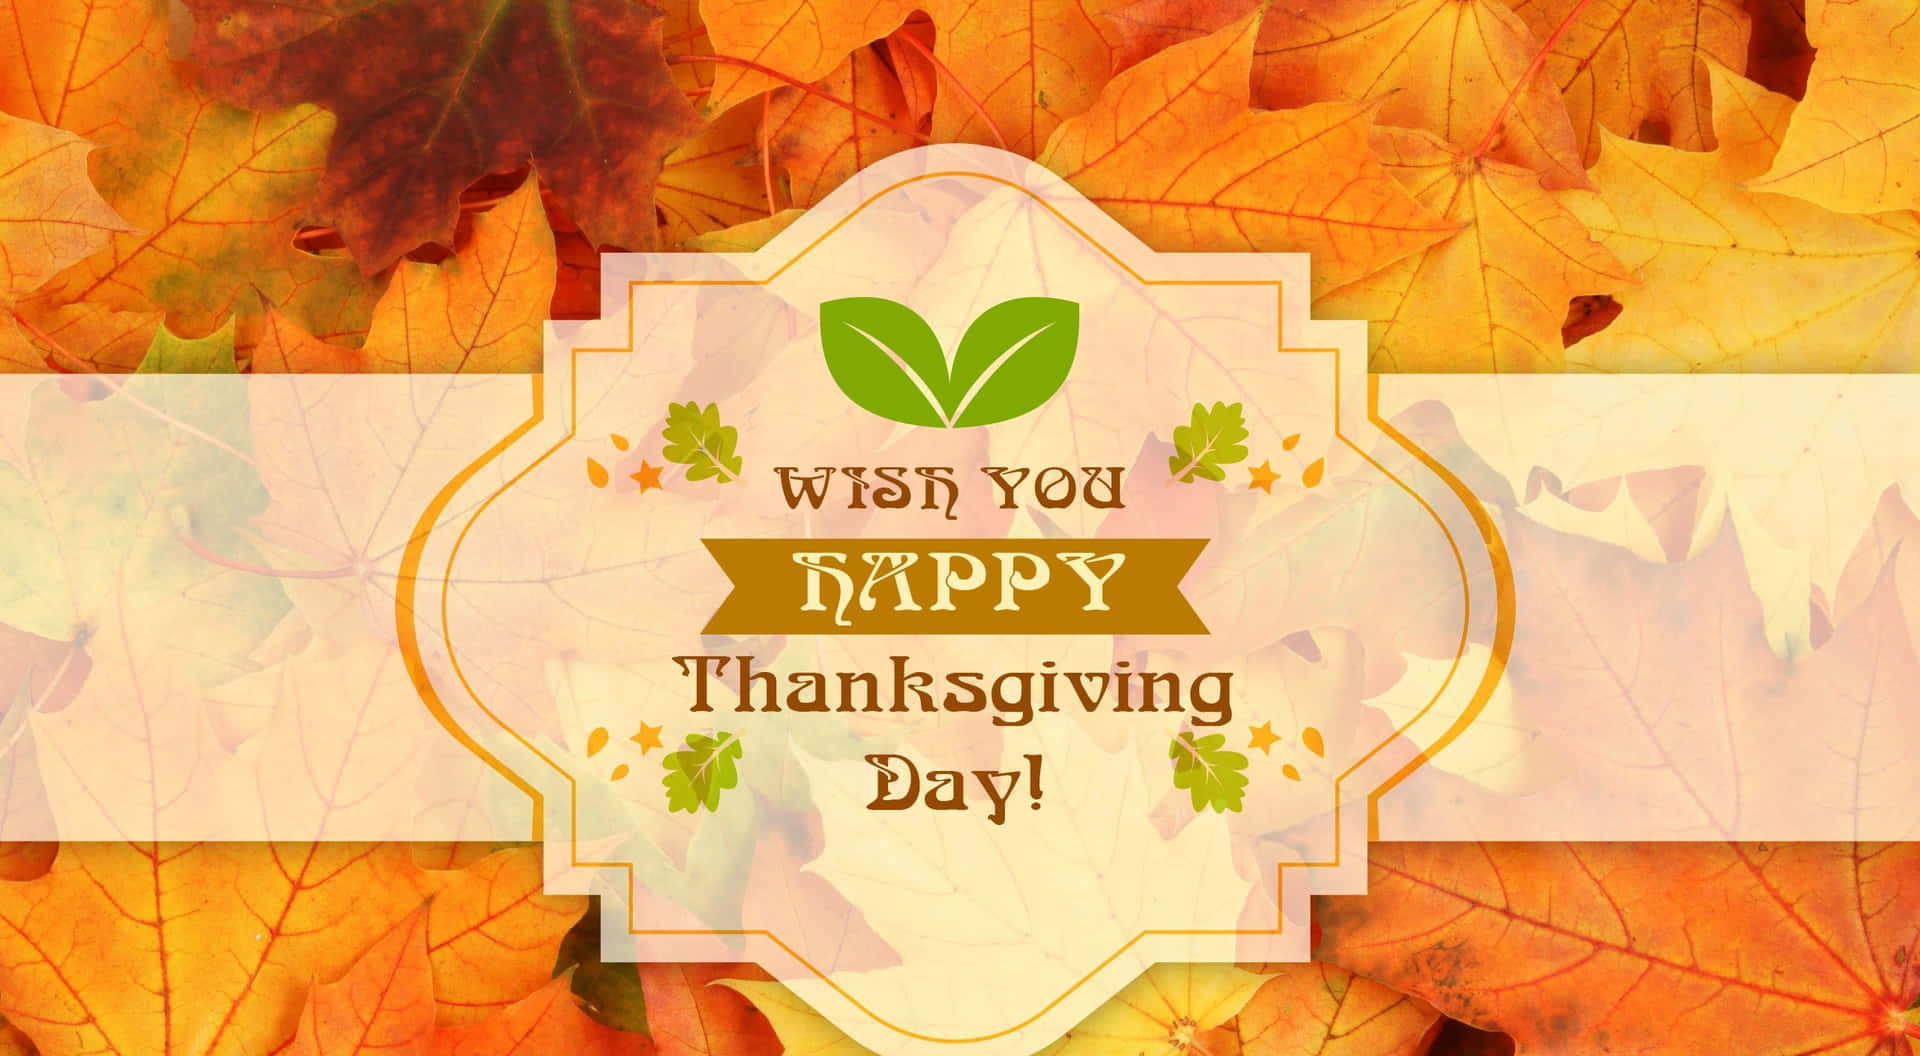 Celebrate Thanksgiving with Family and Friends Wallpaper